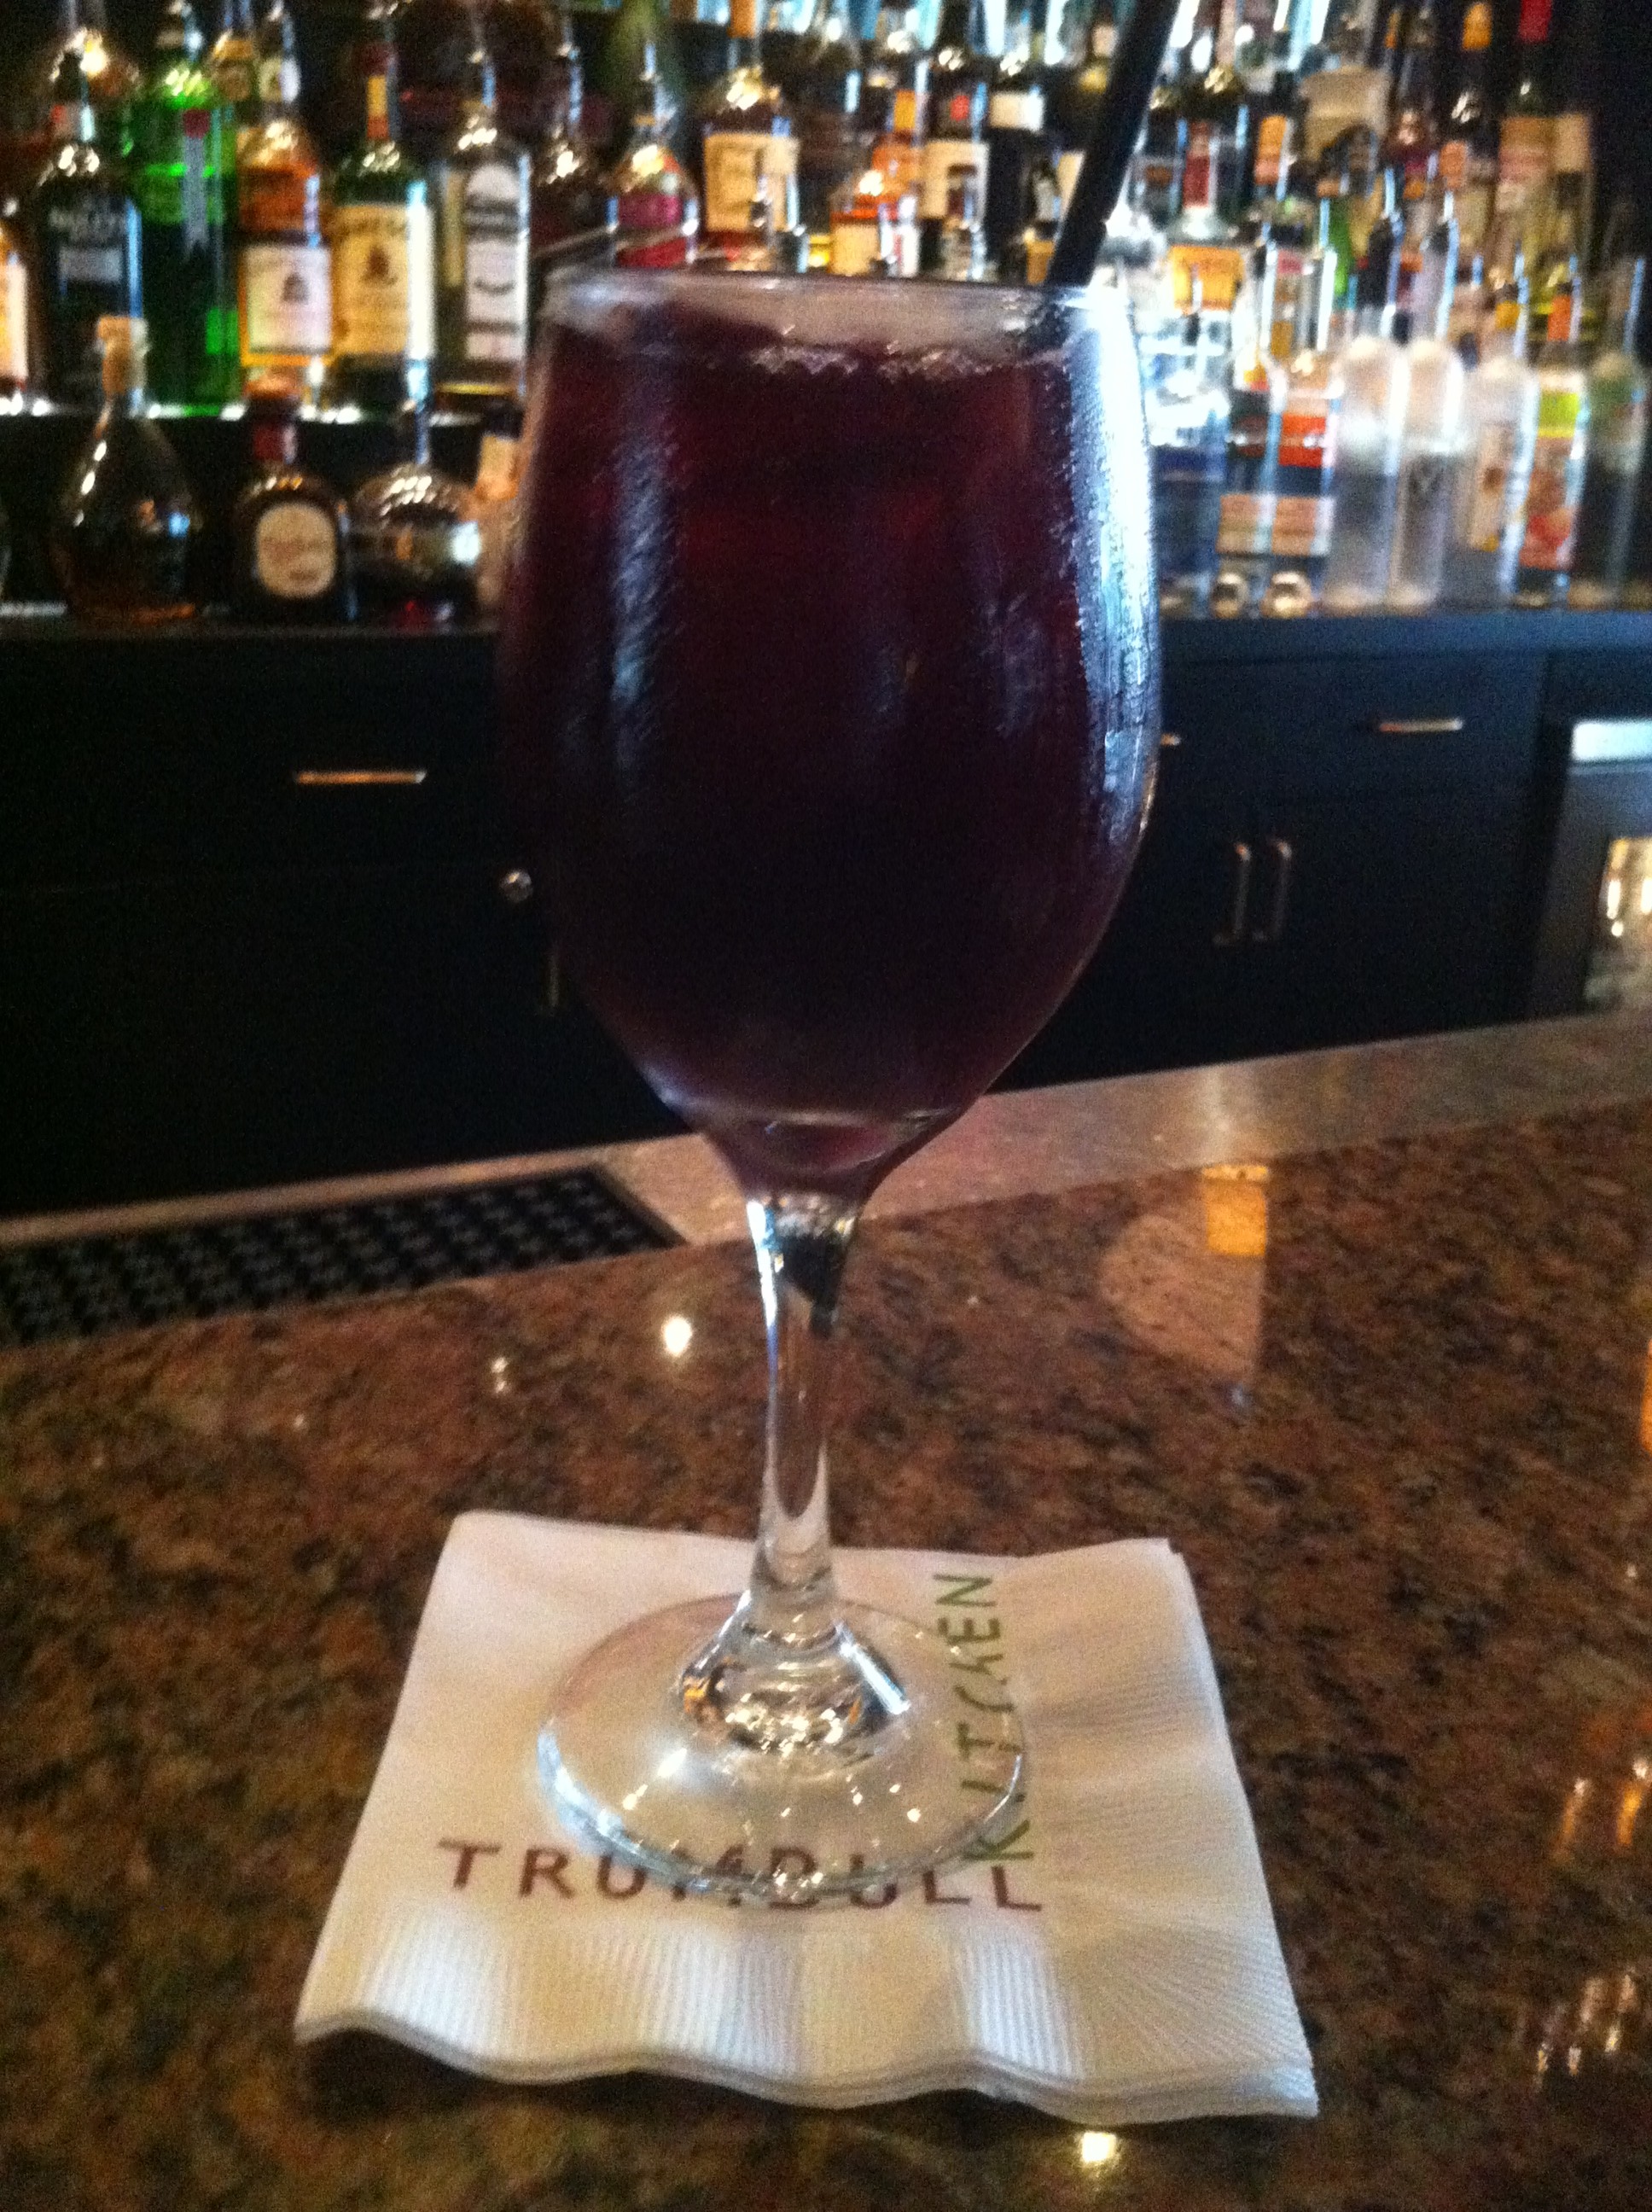 House Made Kegged Sangria Now Online At Trumbull Kitchen Max Blog